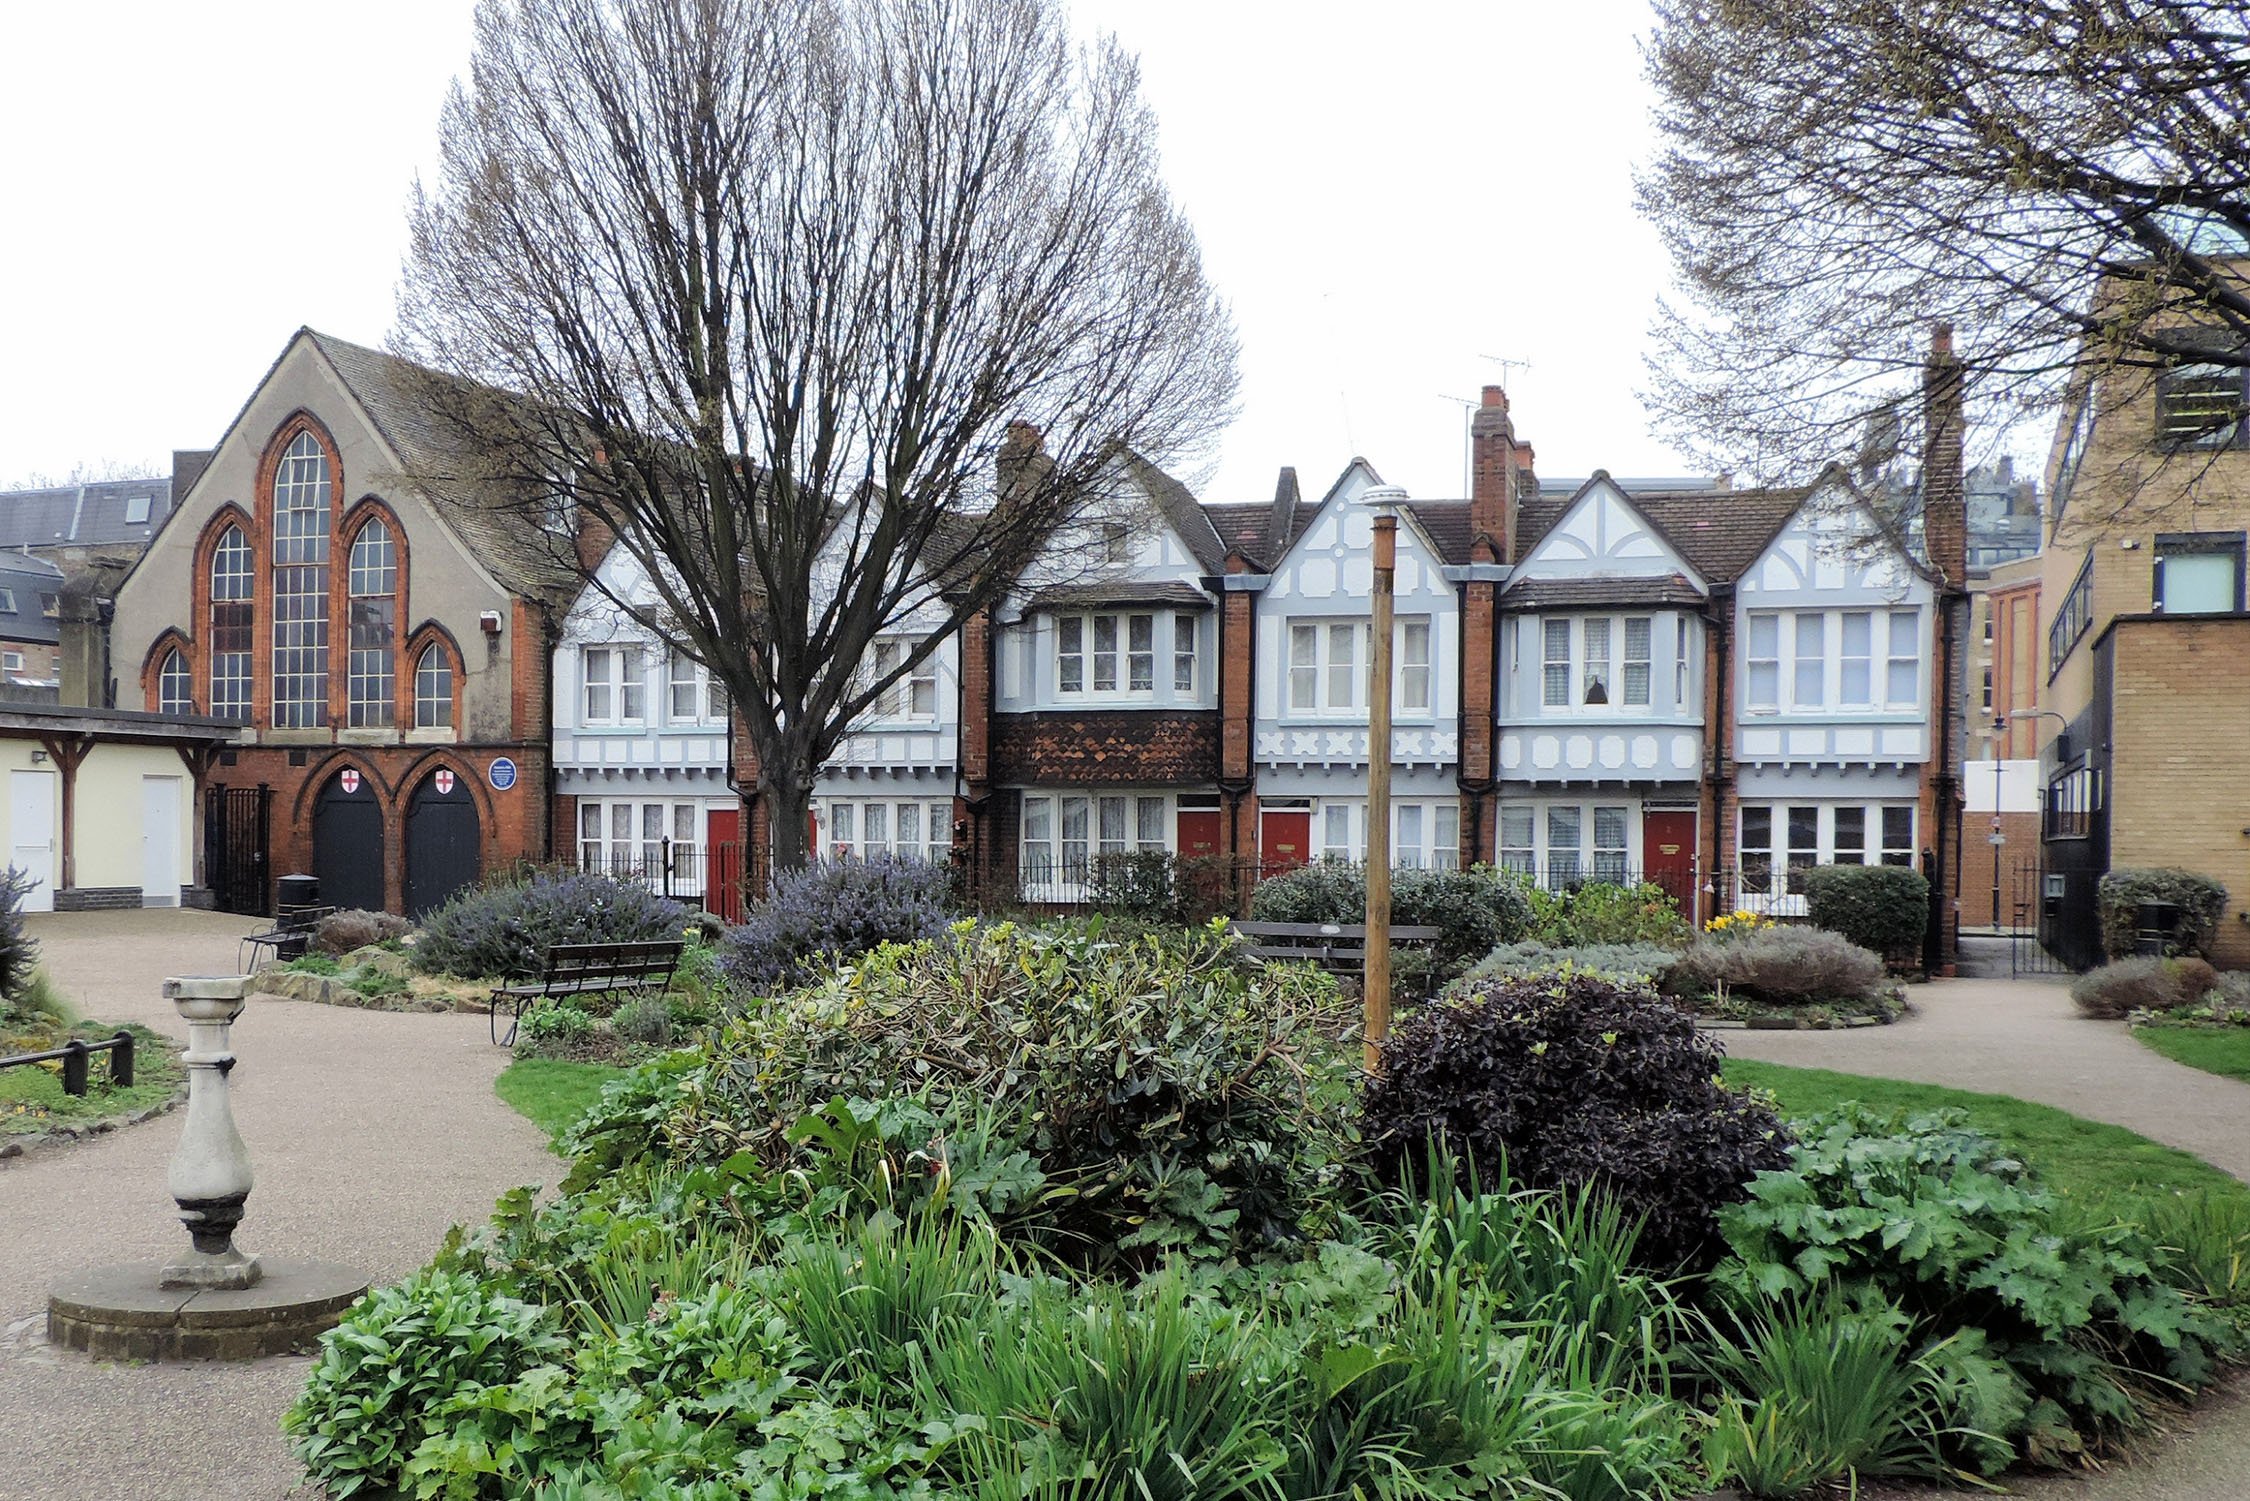 Redcross Cottages, Hall and gardens Bermondsey, London, restored to Octavia Hill’s original design in 2005.